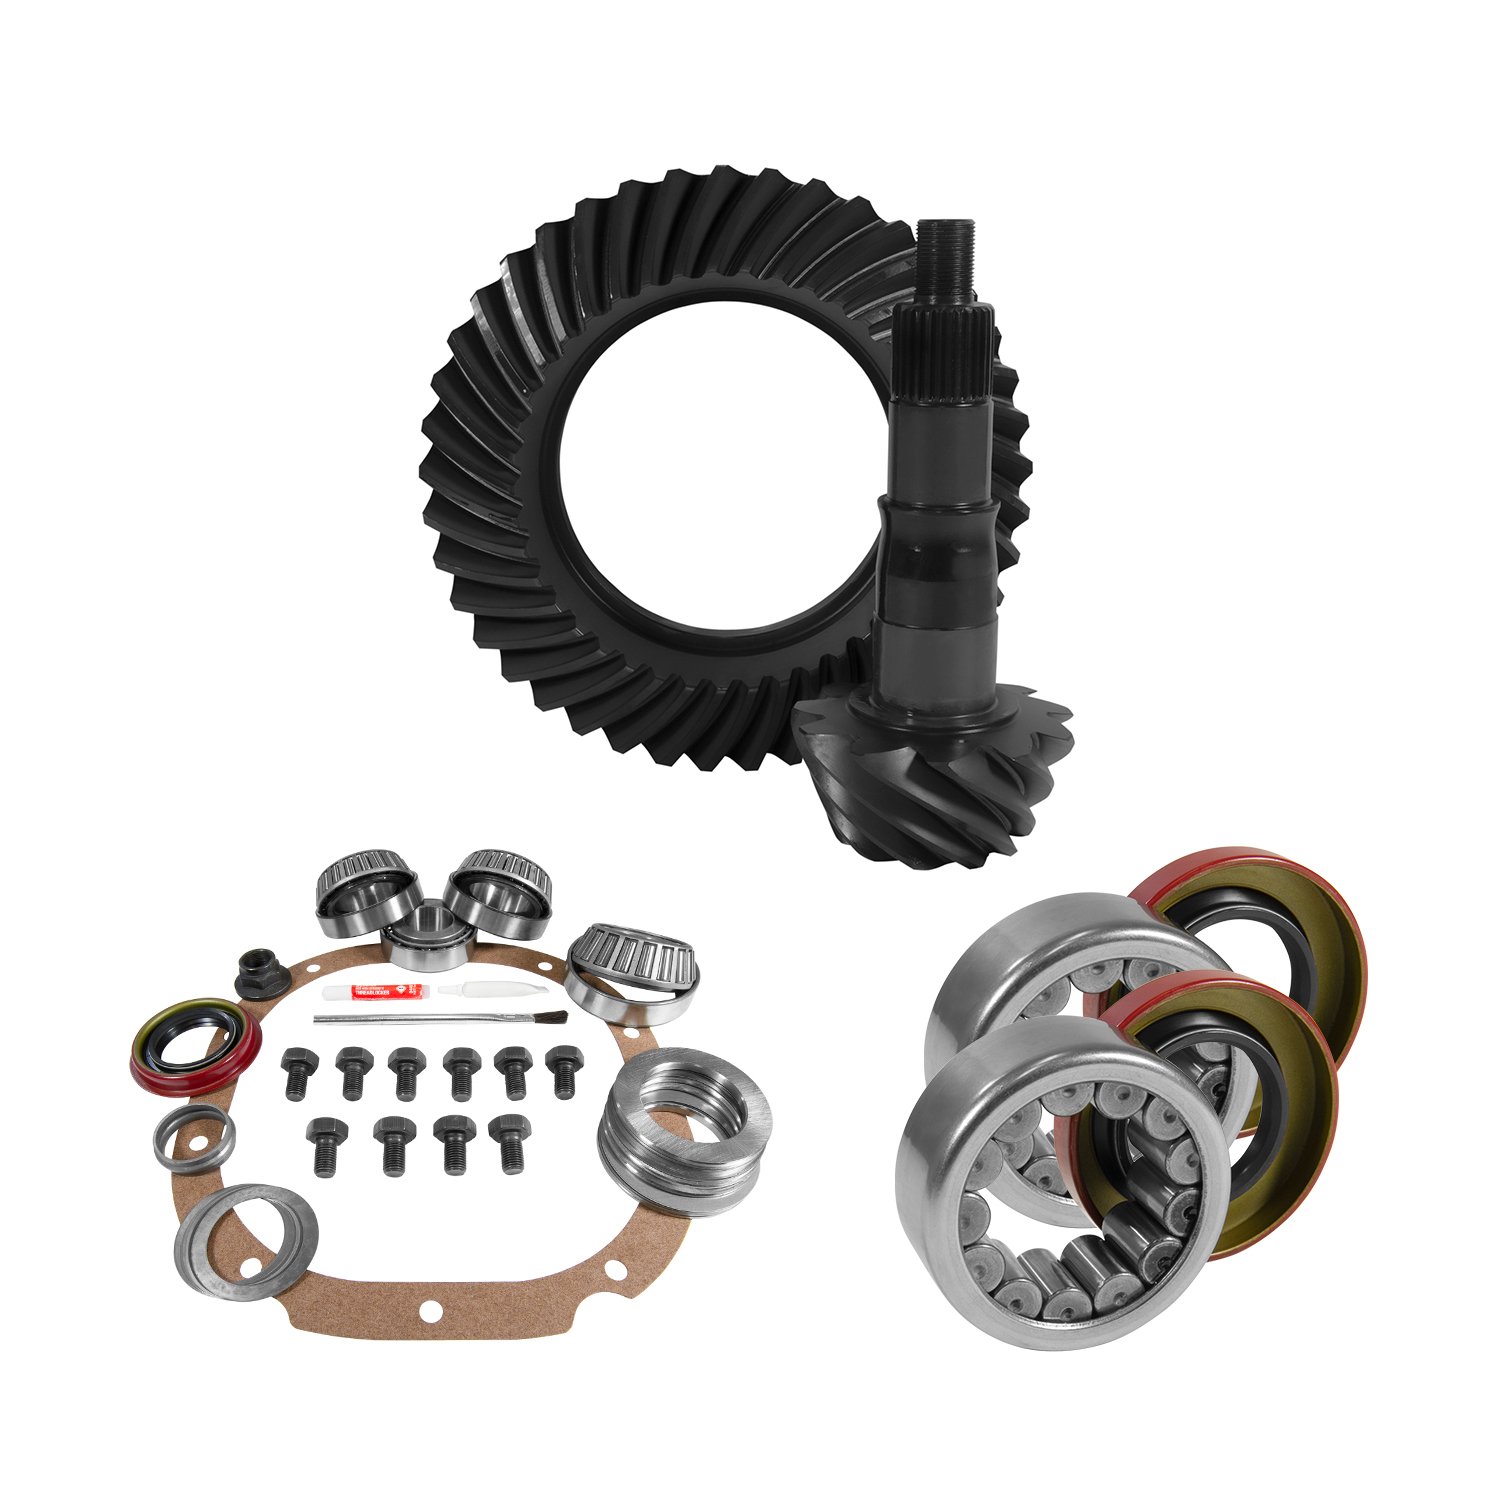 USA Standard 10776 8.8 in. Ford 3.55 Rear Ring & Pinion Install Kit, 2.99 in. Od Axle Bearings & Seals